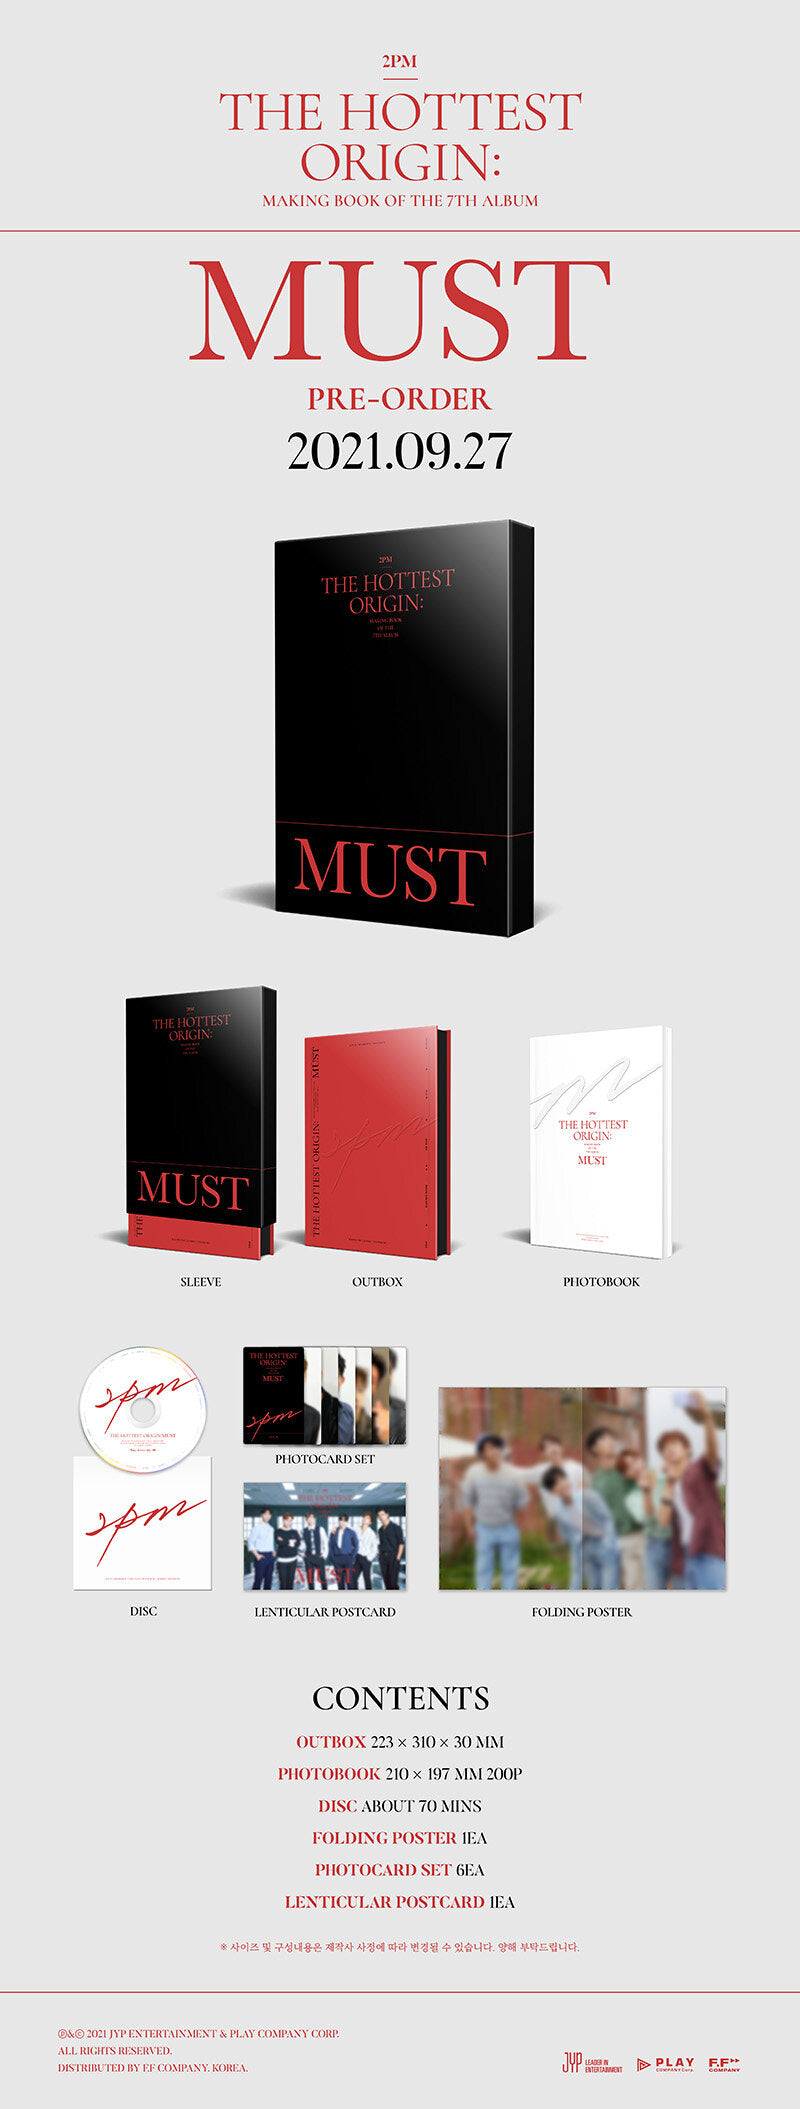 2PM 'THE HOTTEST ORIGIN : MUST' MAKING BOOK DETAIL